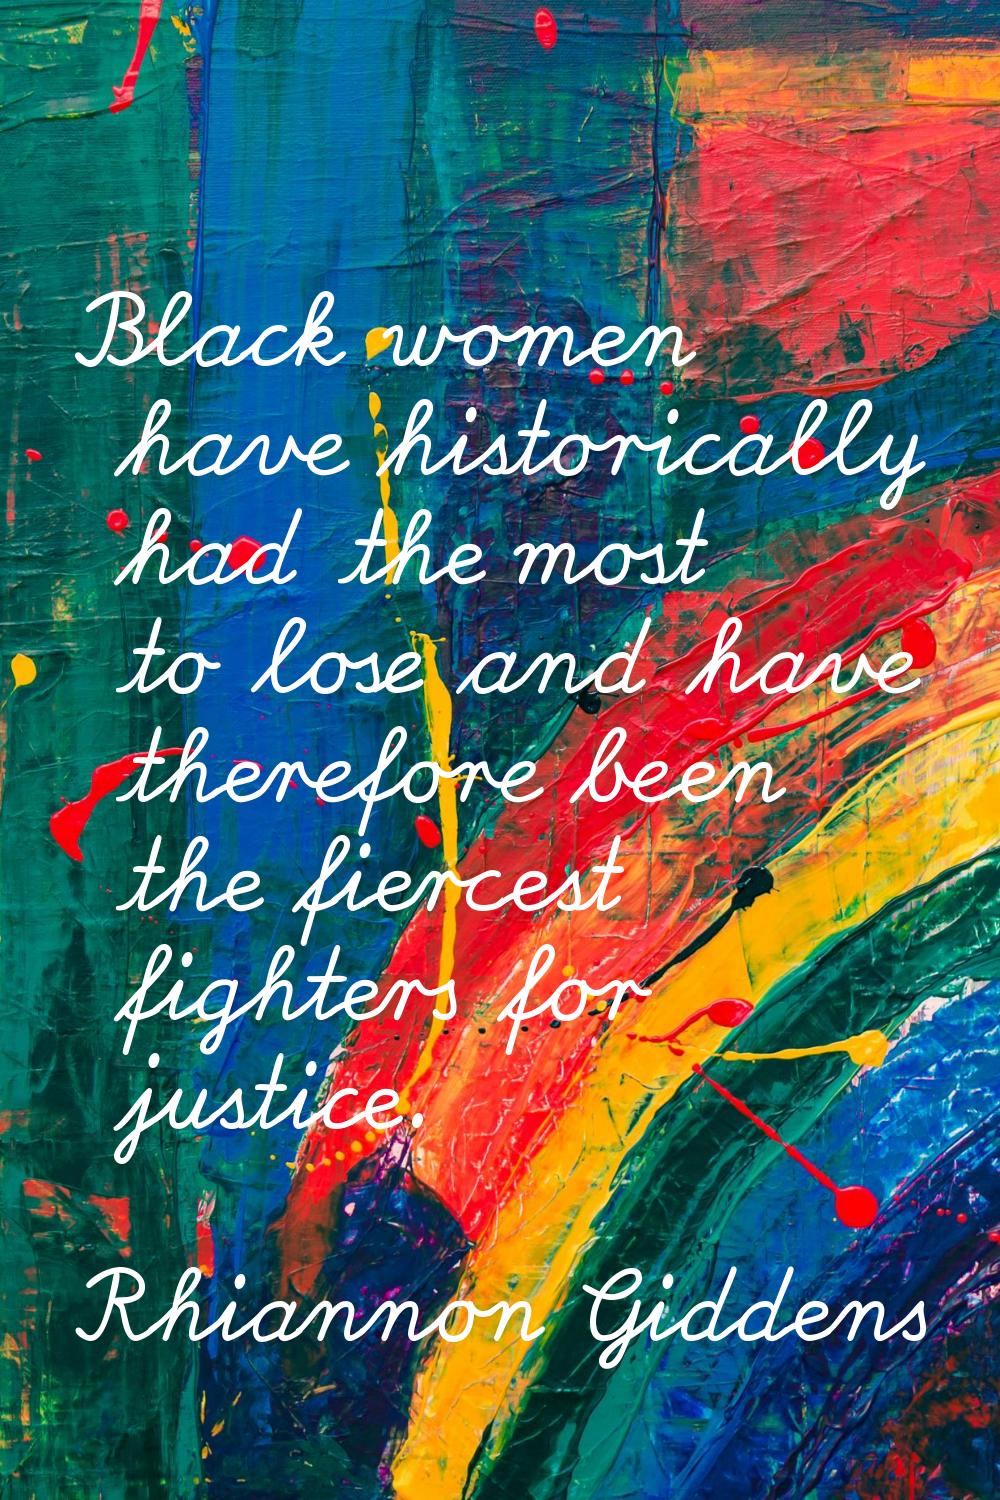 Black women have historically had the most to lose and have therefore been the fiercest fighters fo